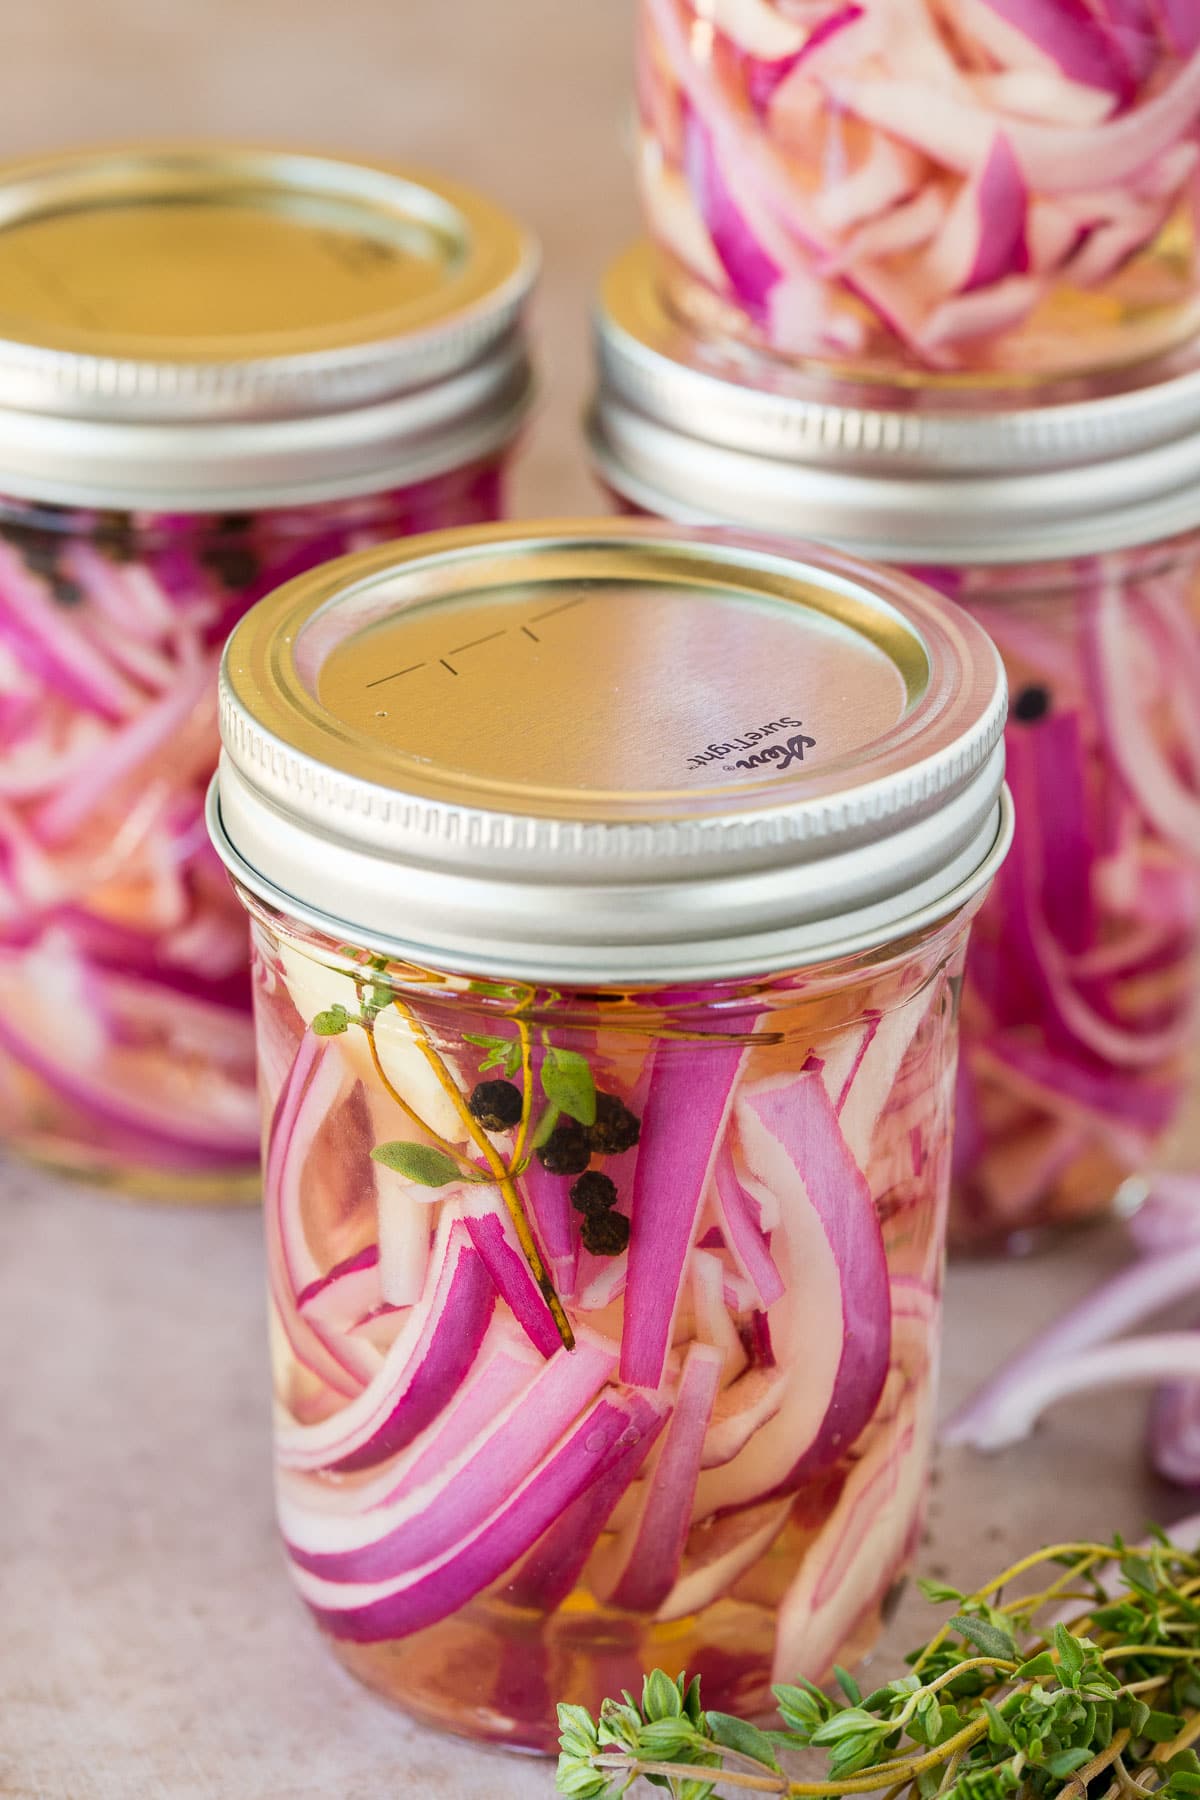 Red onions in a jar of vinegar solution.